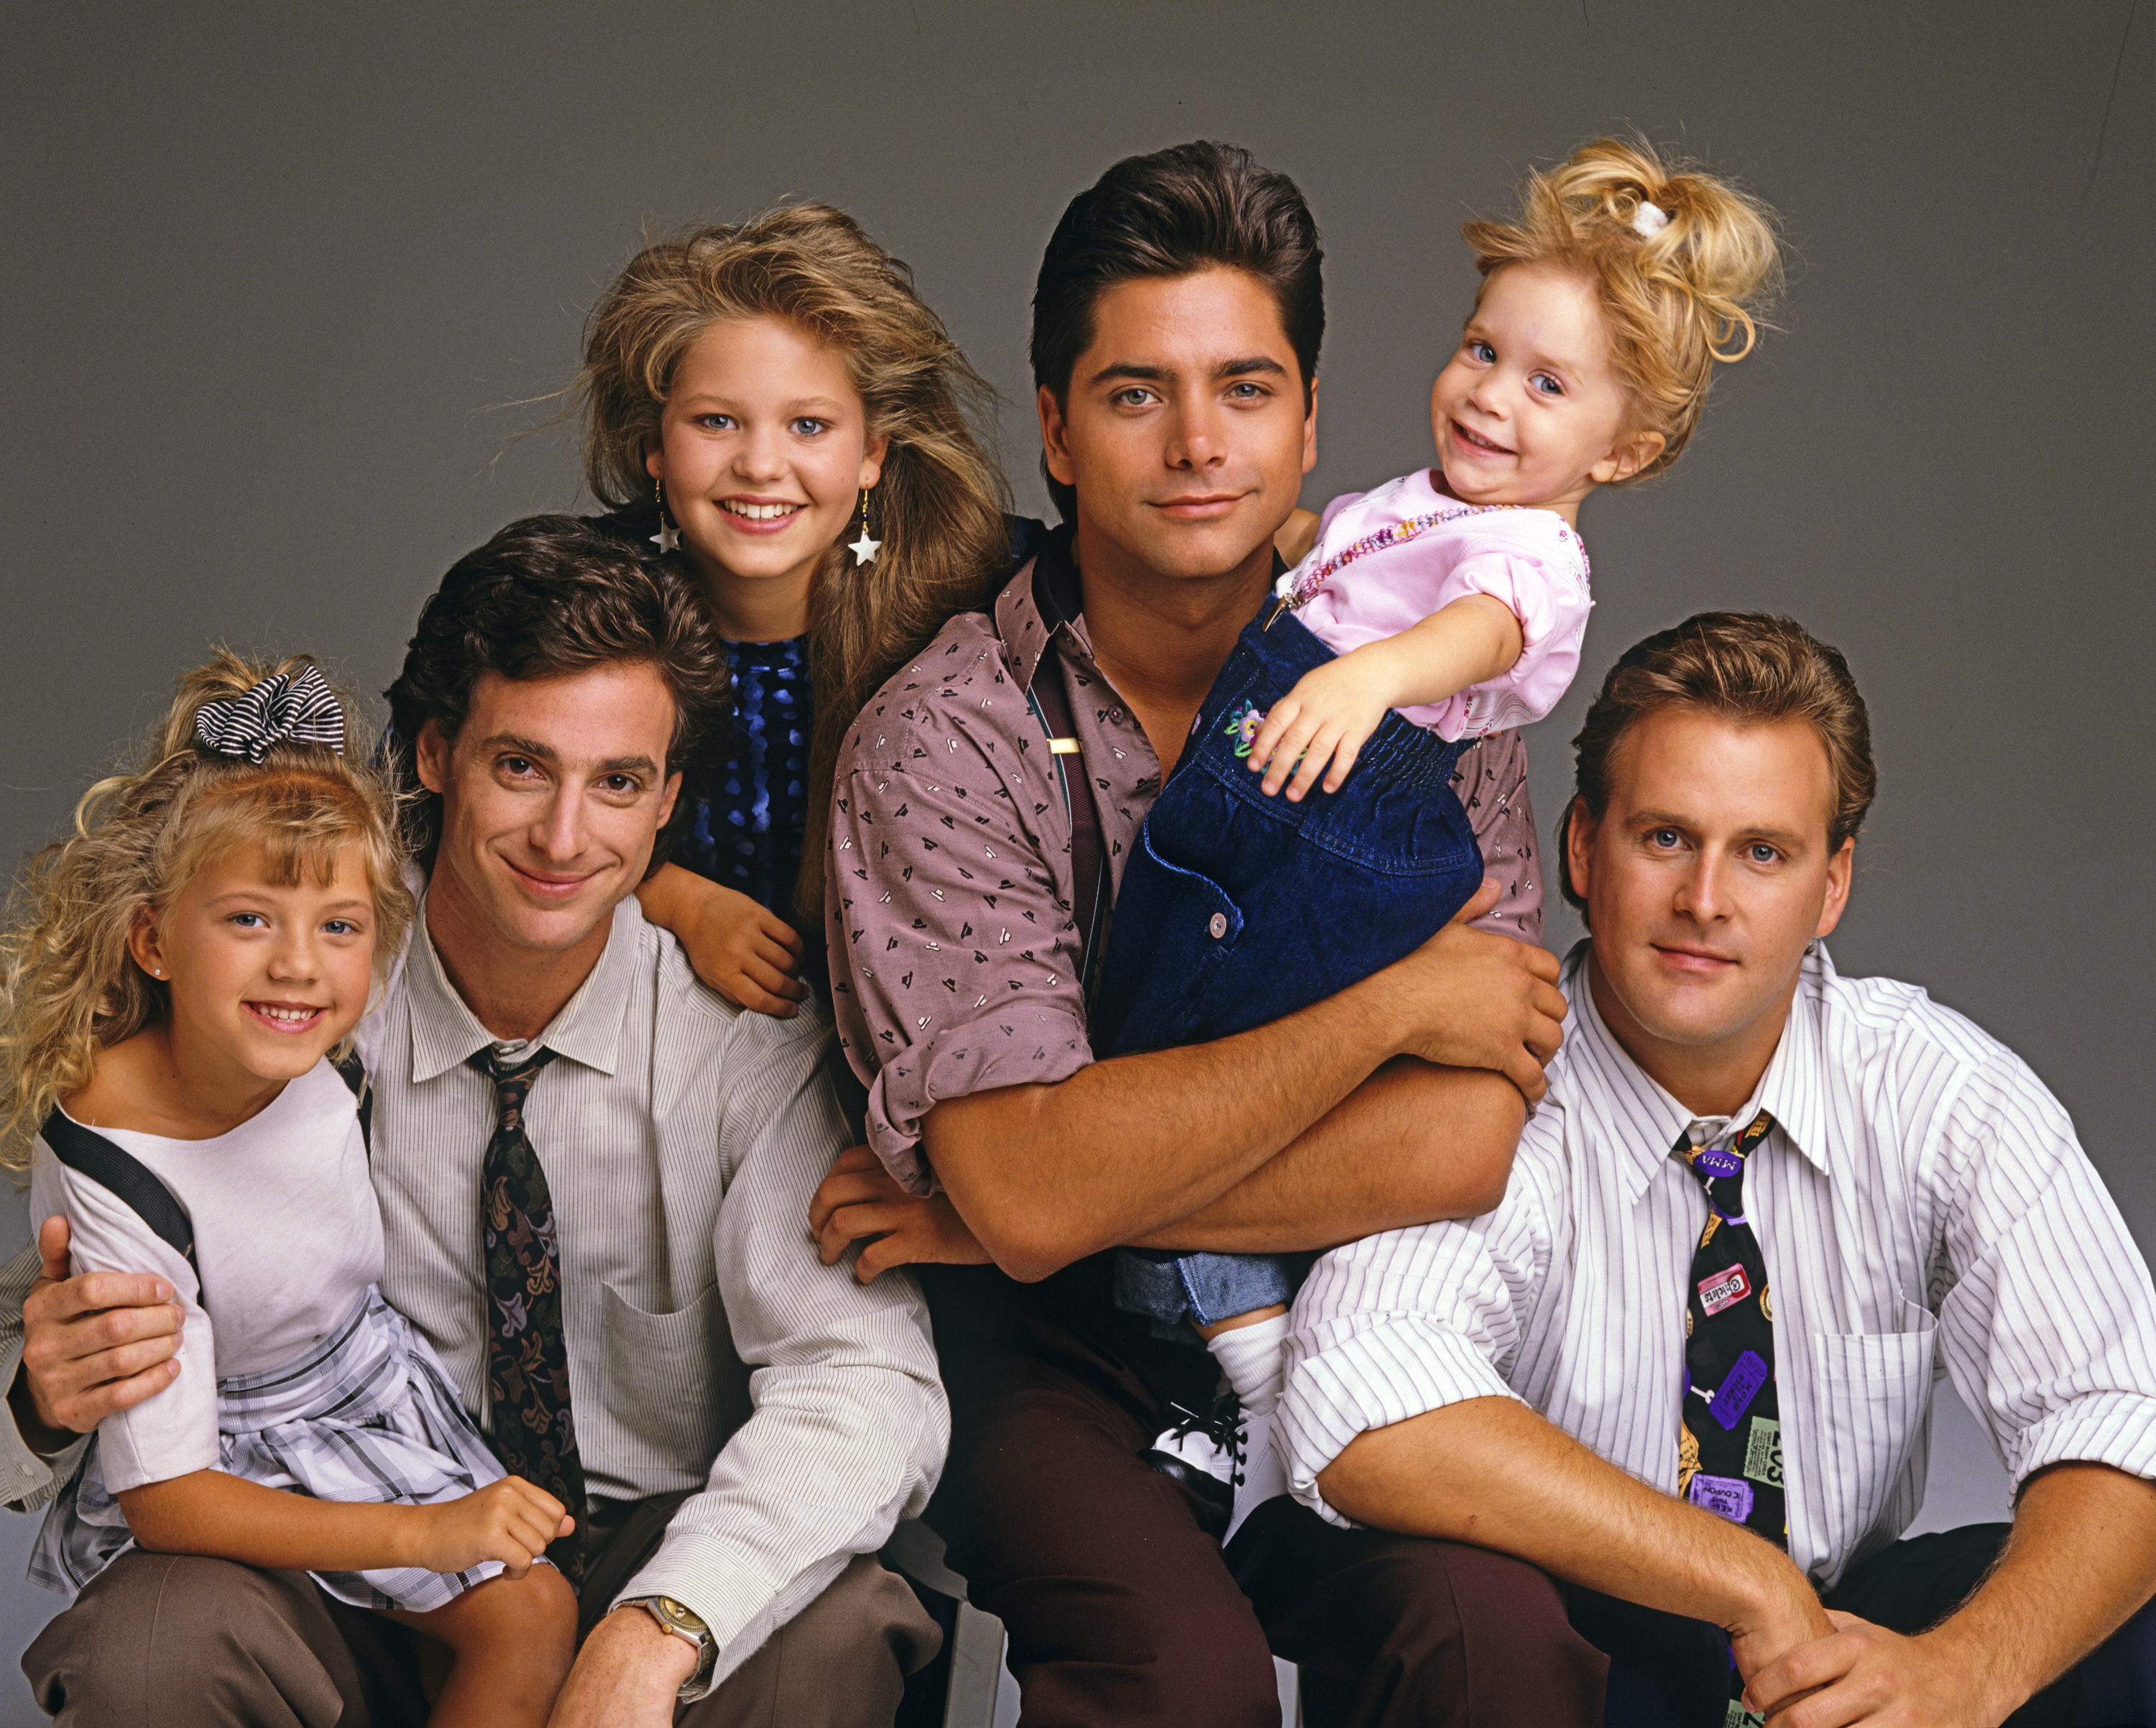 The Most Outdated Hairstyles From 'Full House' Will Make You Weep With Joy  — PHOTOS